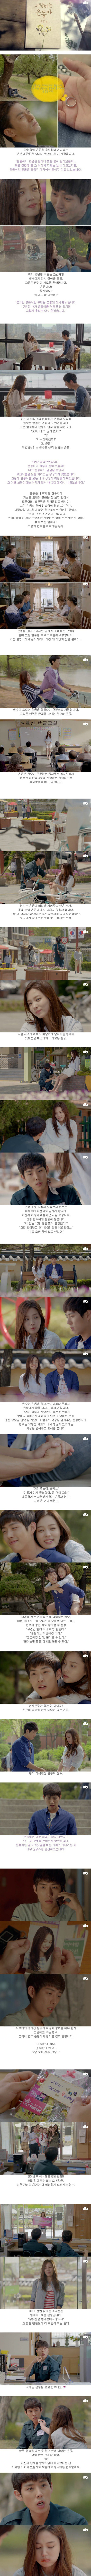 episodes 1 and 2 captures for the Korean drama 'My Love Eun-dong'